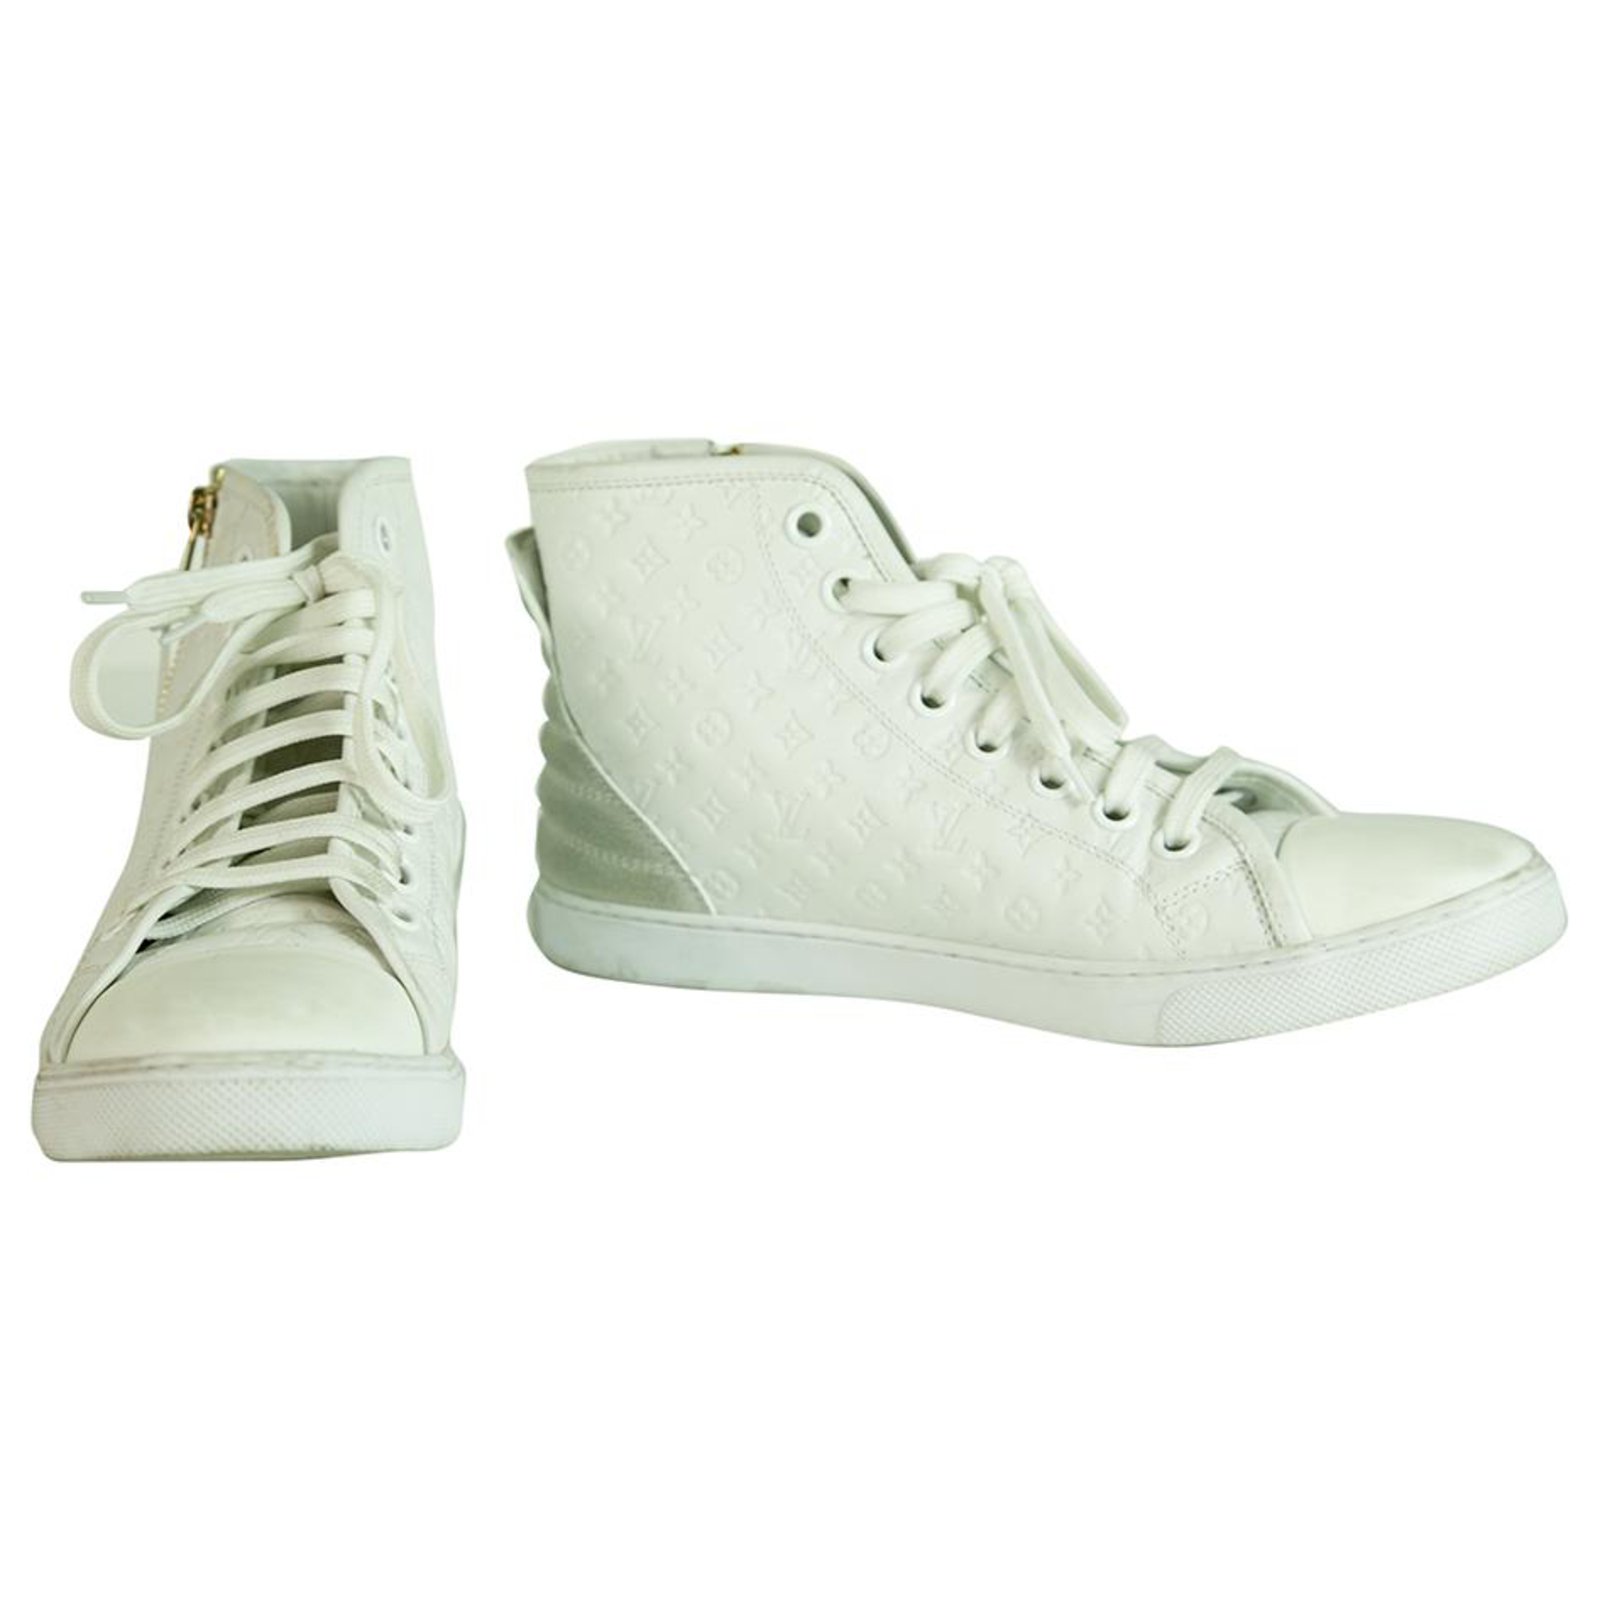 Louis Vuitton Punchy Empreinte Leather High Top Sneakers Ivory off